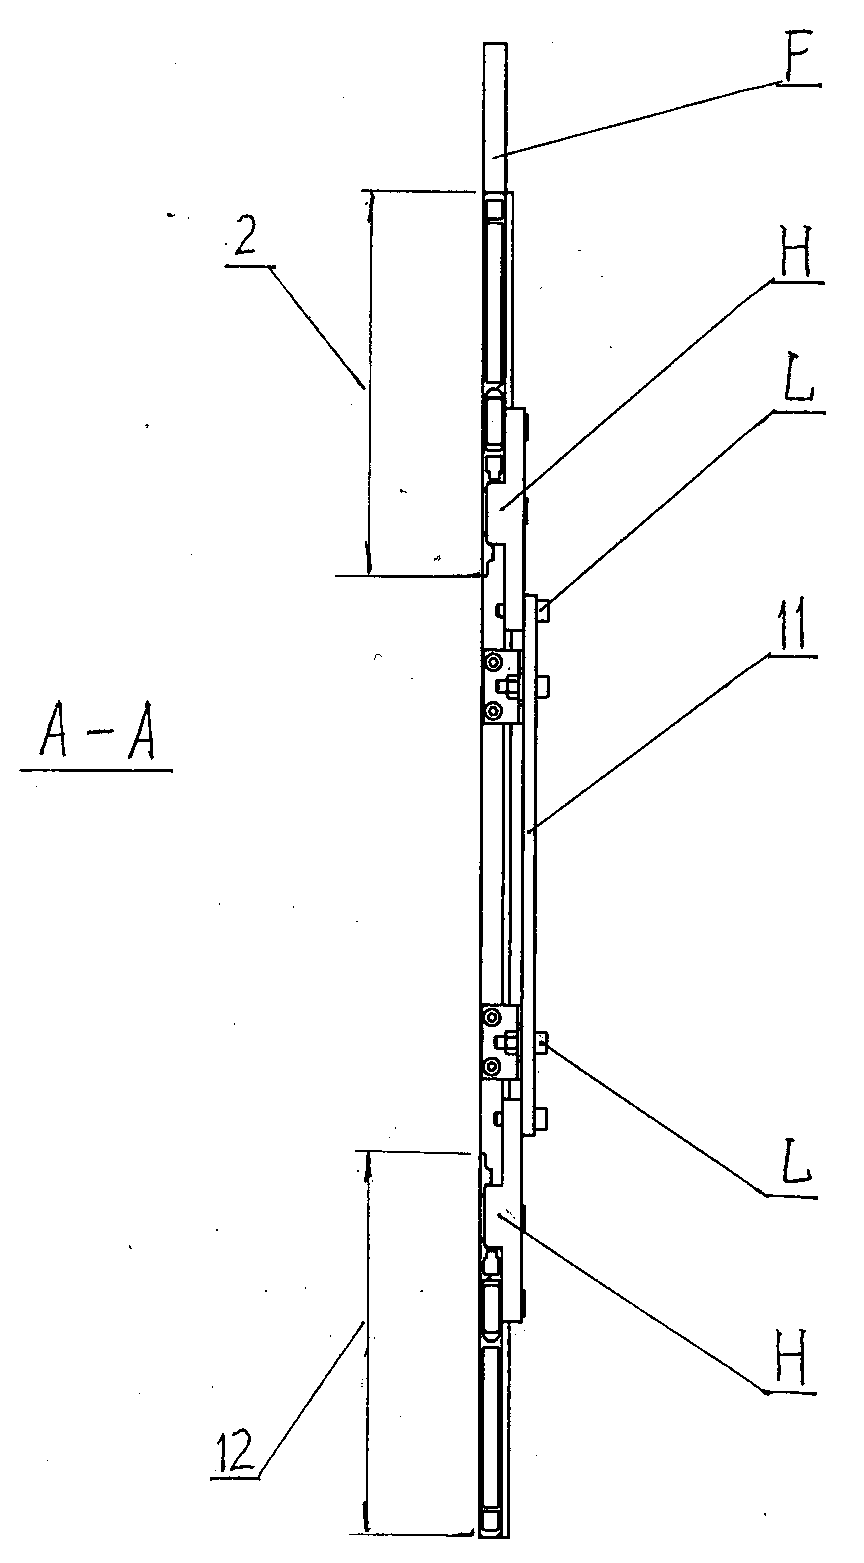 Loom heald frame provided with transverse moving mechanism